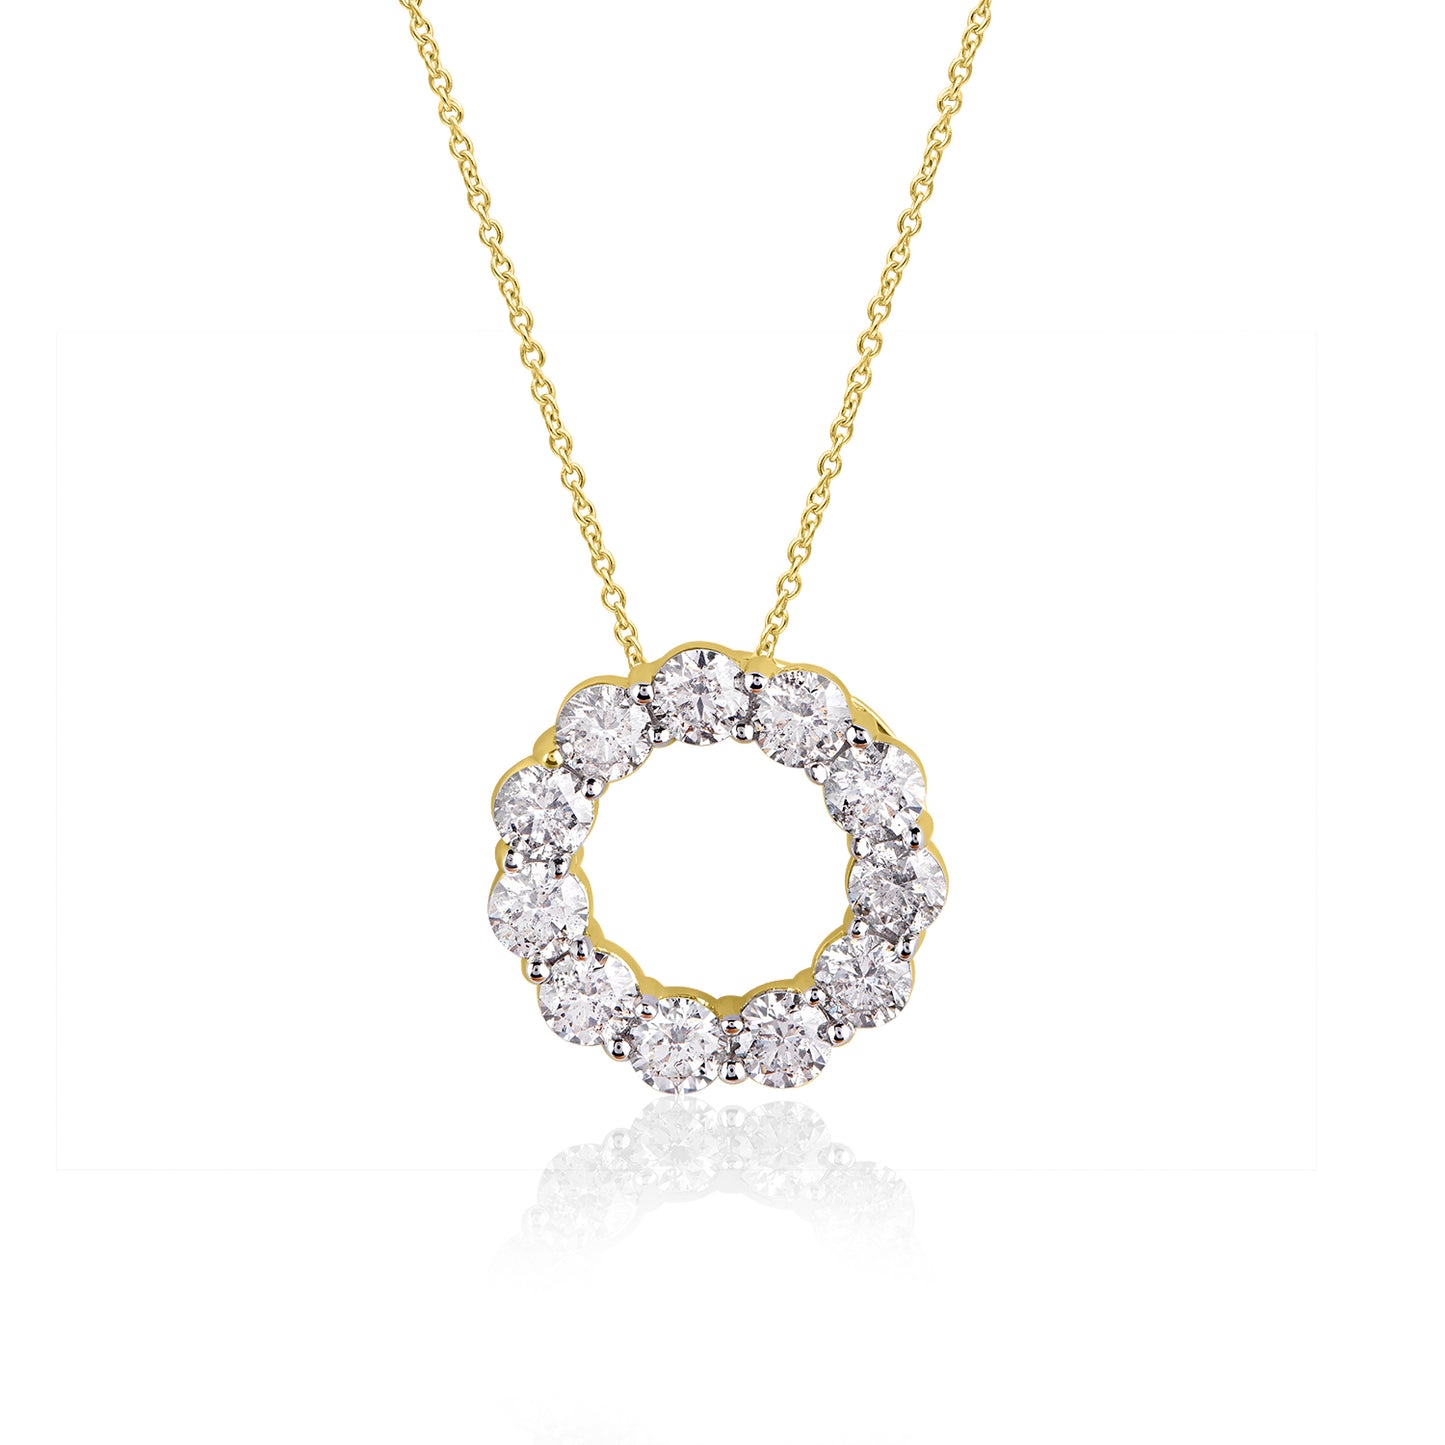 Eternity Open Circle Pendant Necklace in 10K Gold